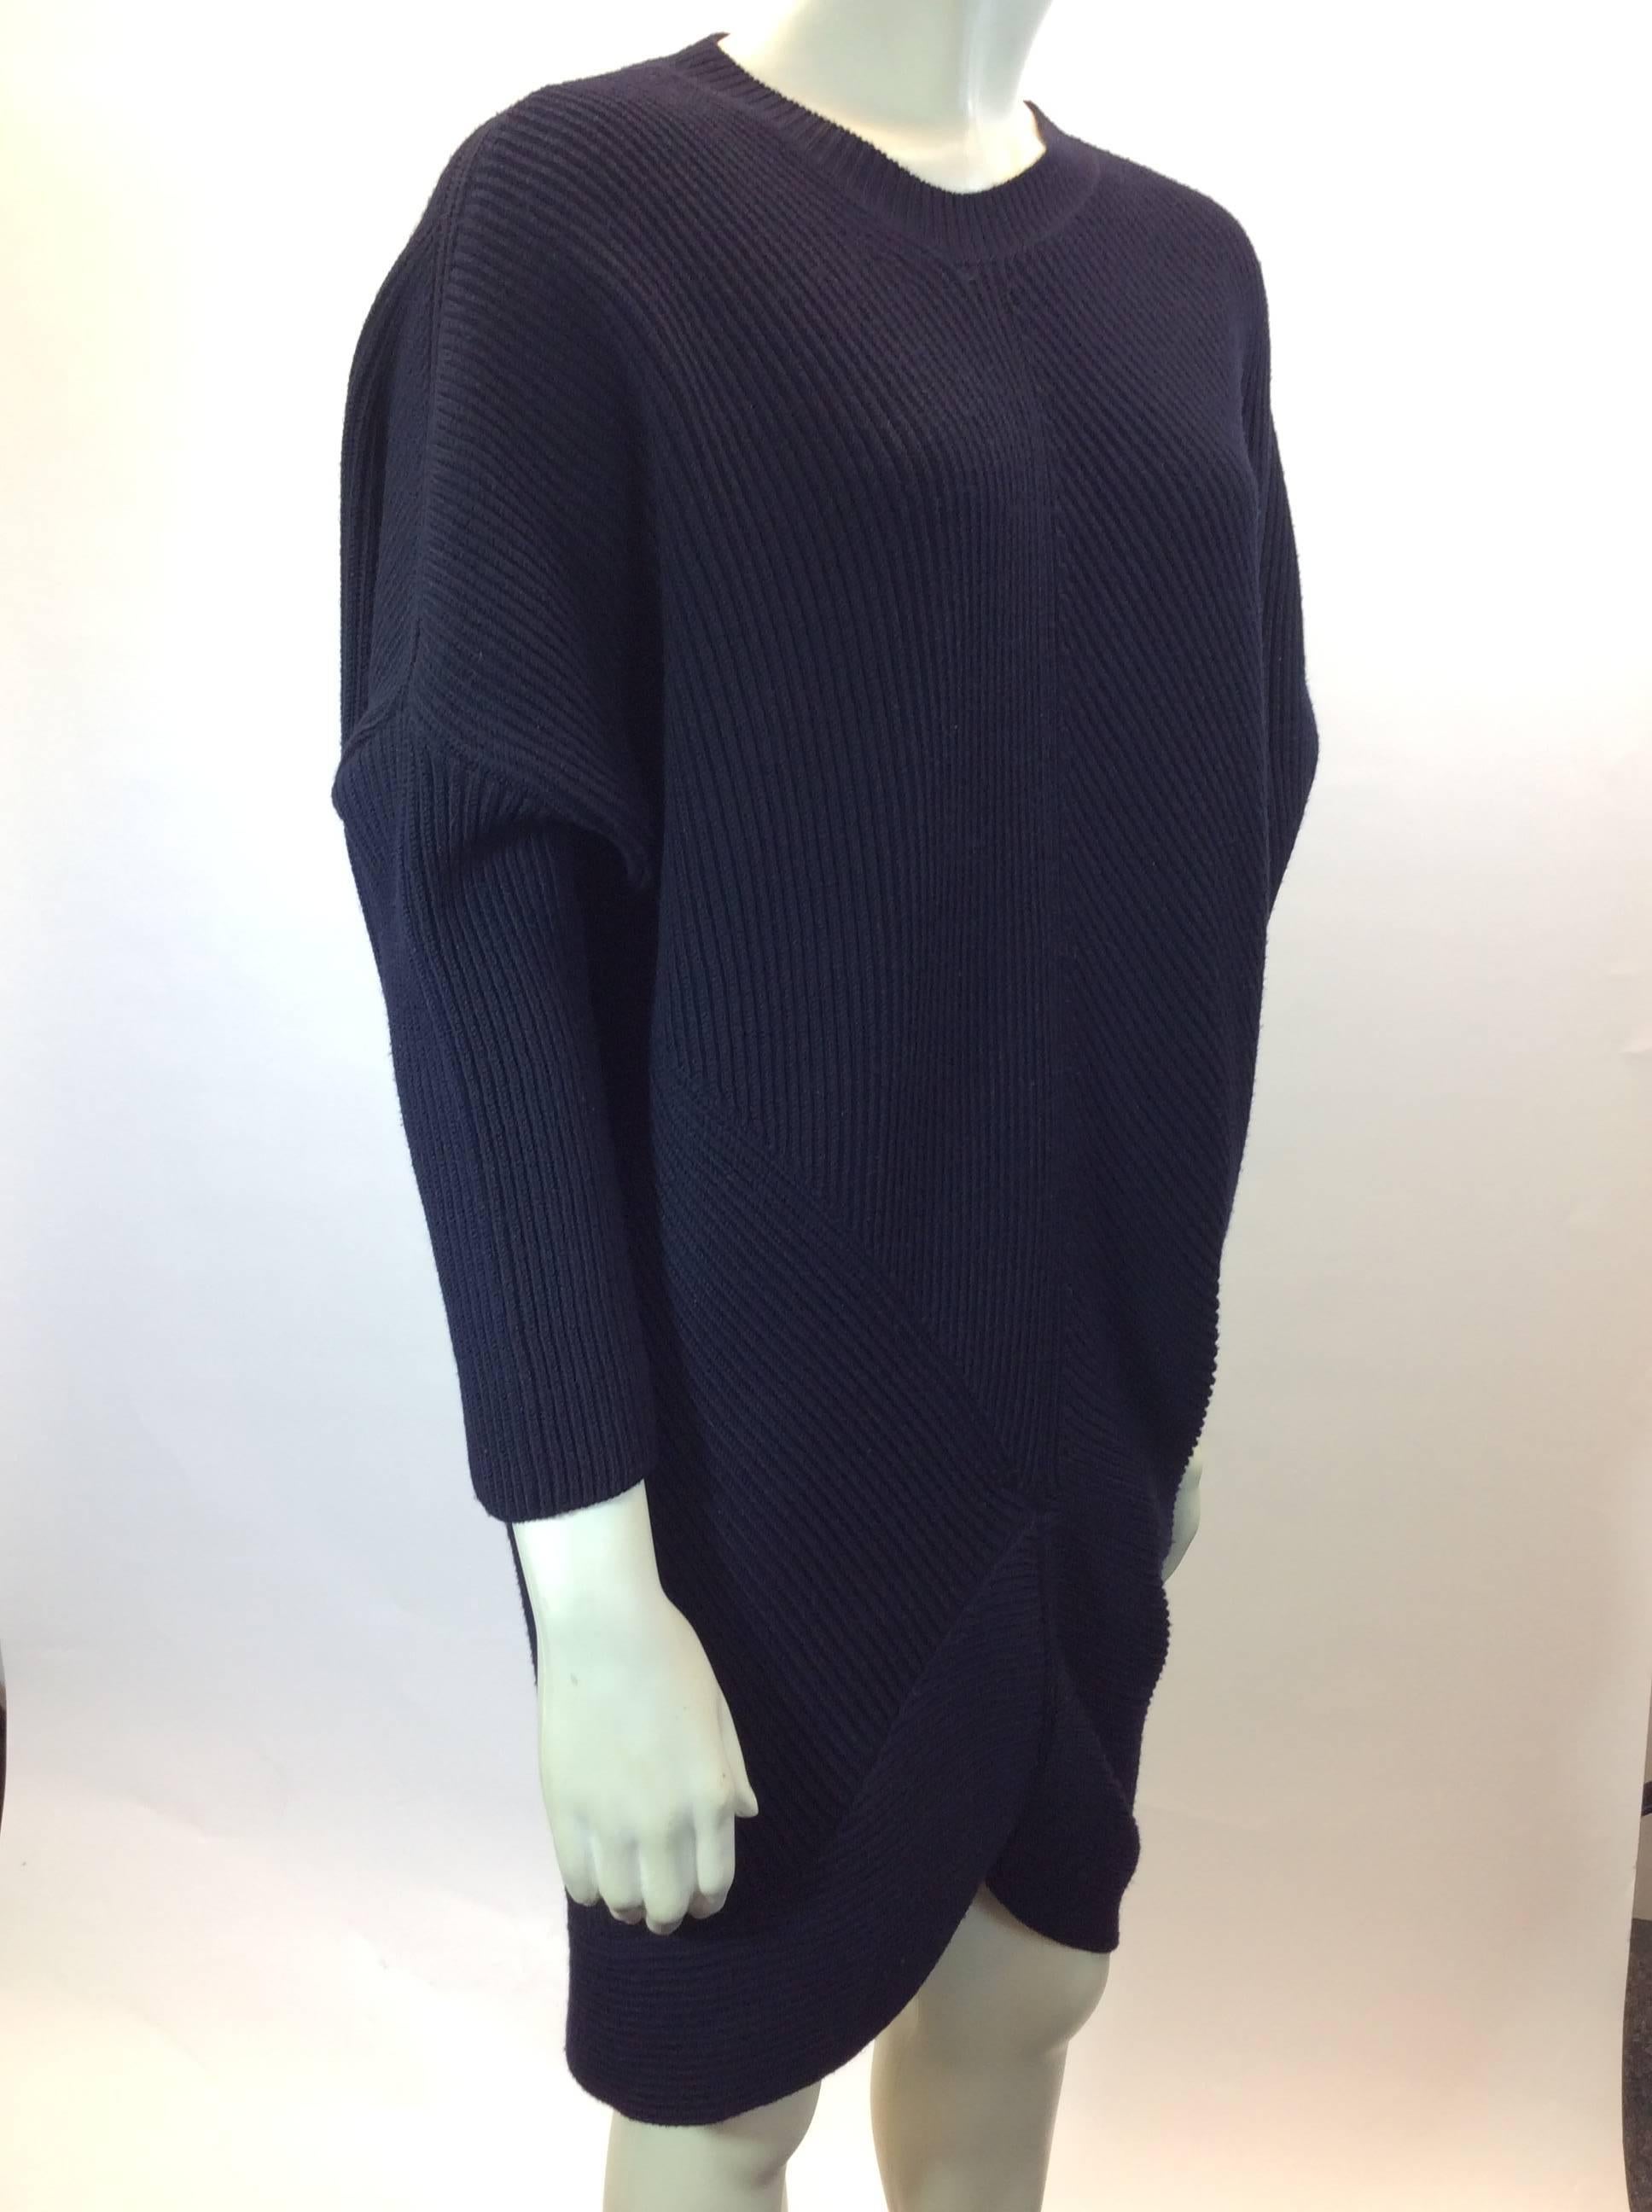 Sweater Tunic
Sleeve Length 23"
Tight around bottom and sleeves
Made in Italy